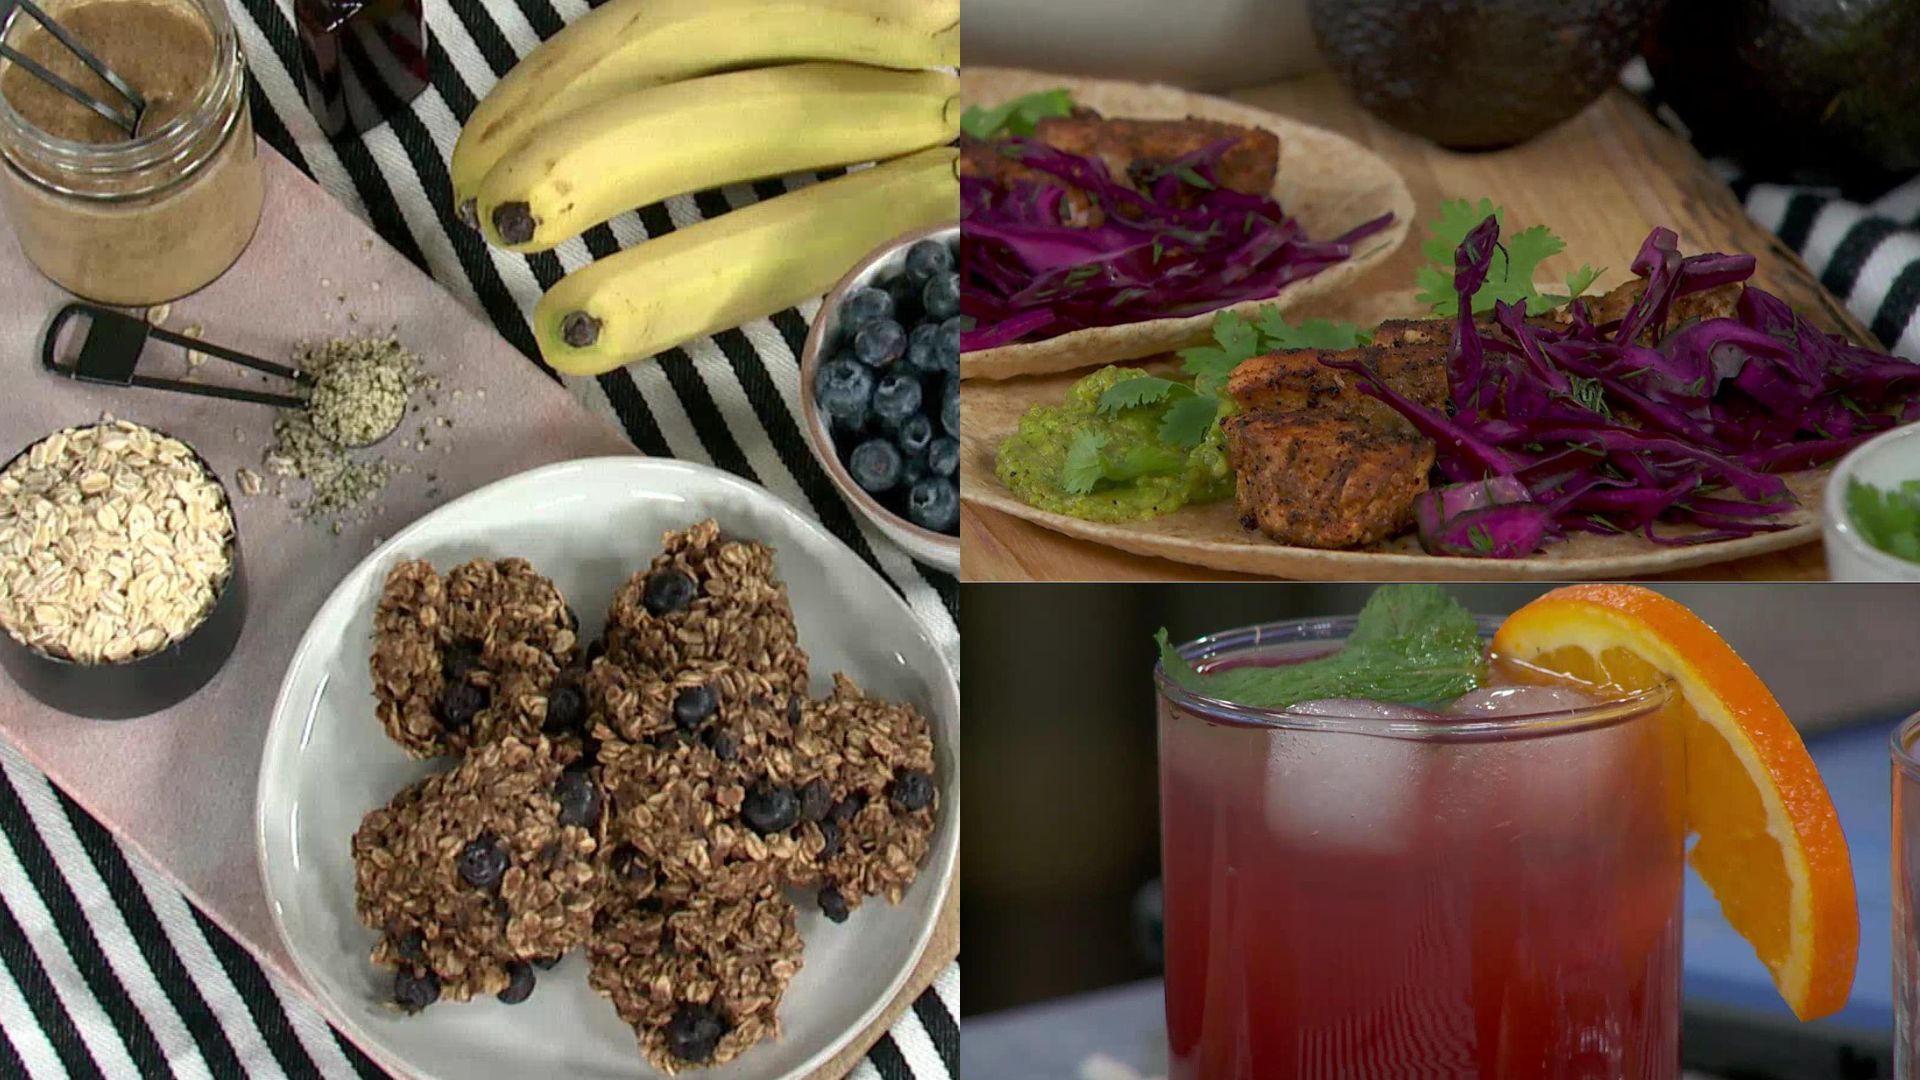 These recipes are designed to keep your liver healthy